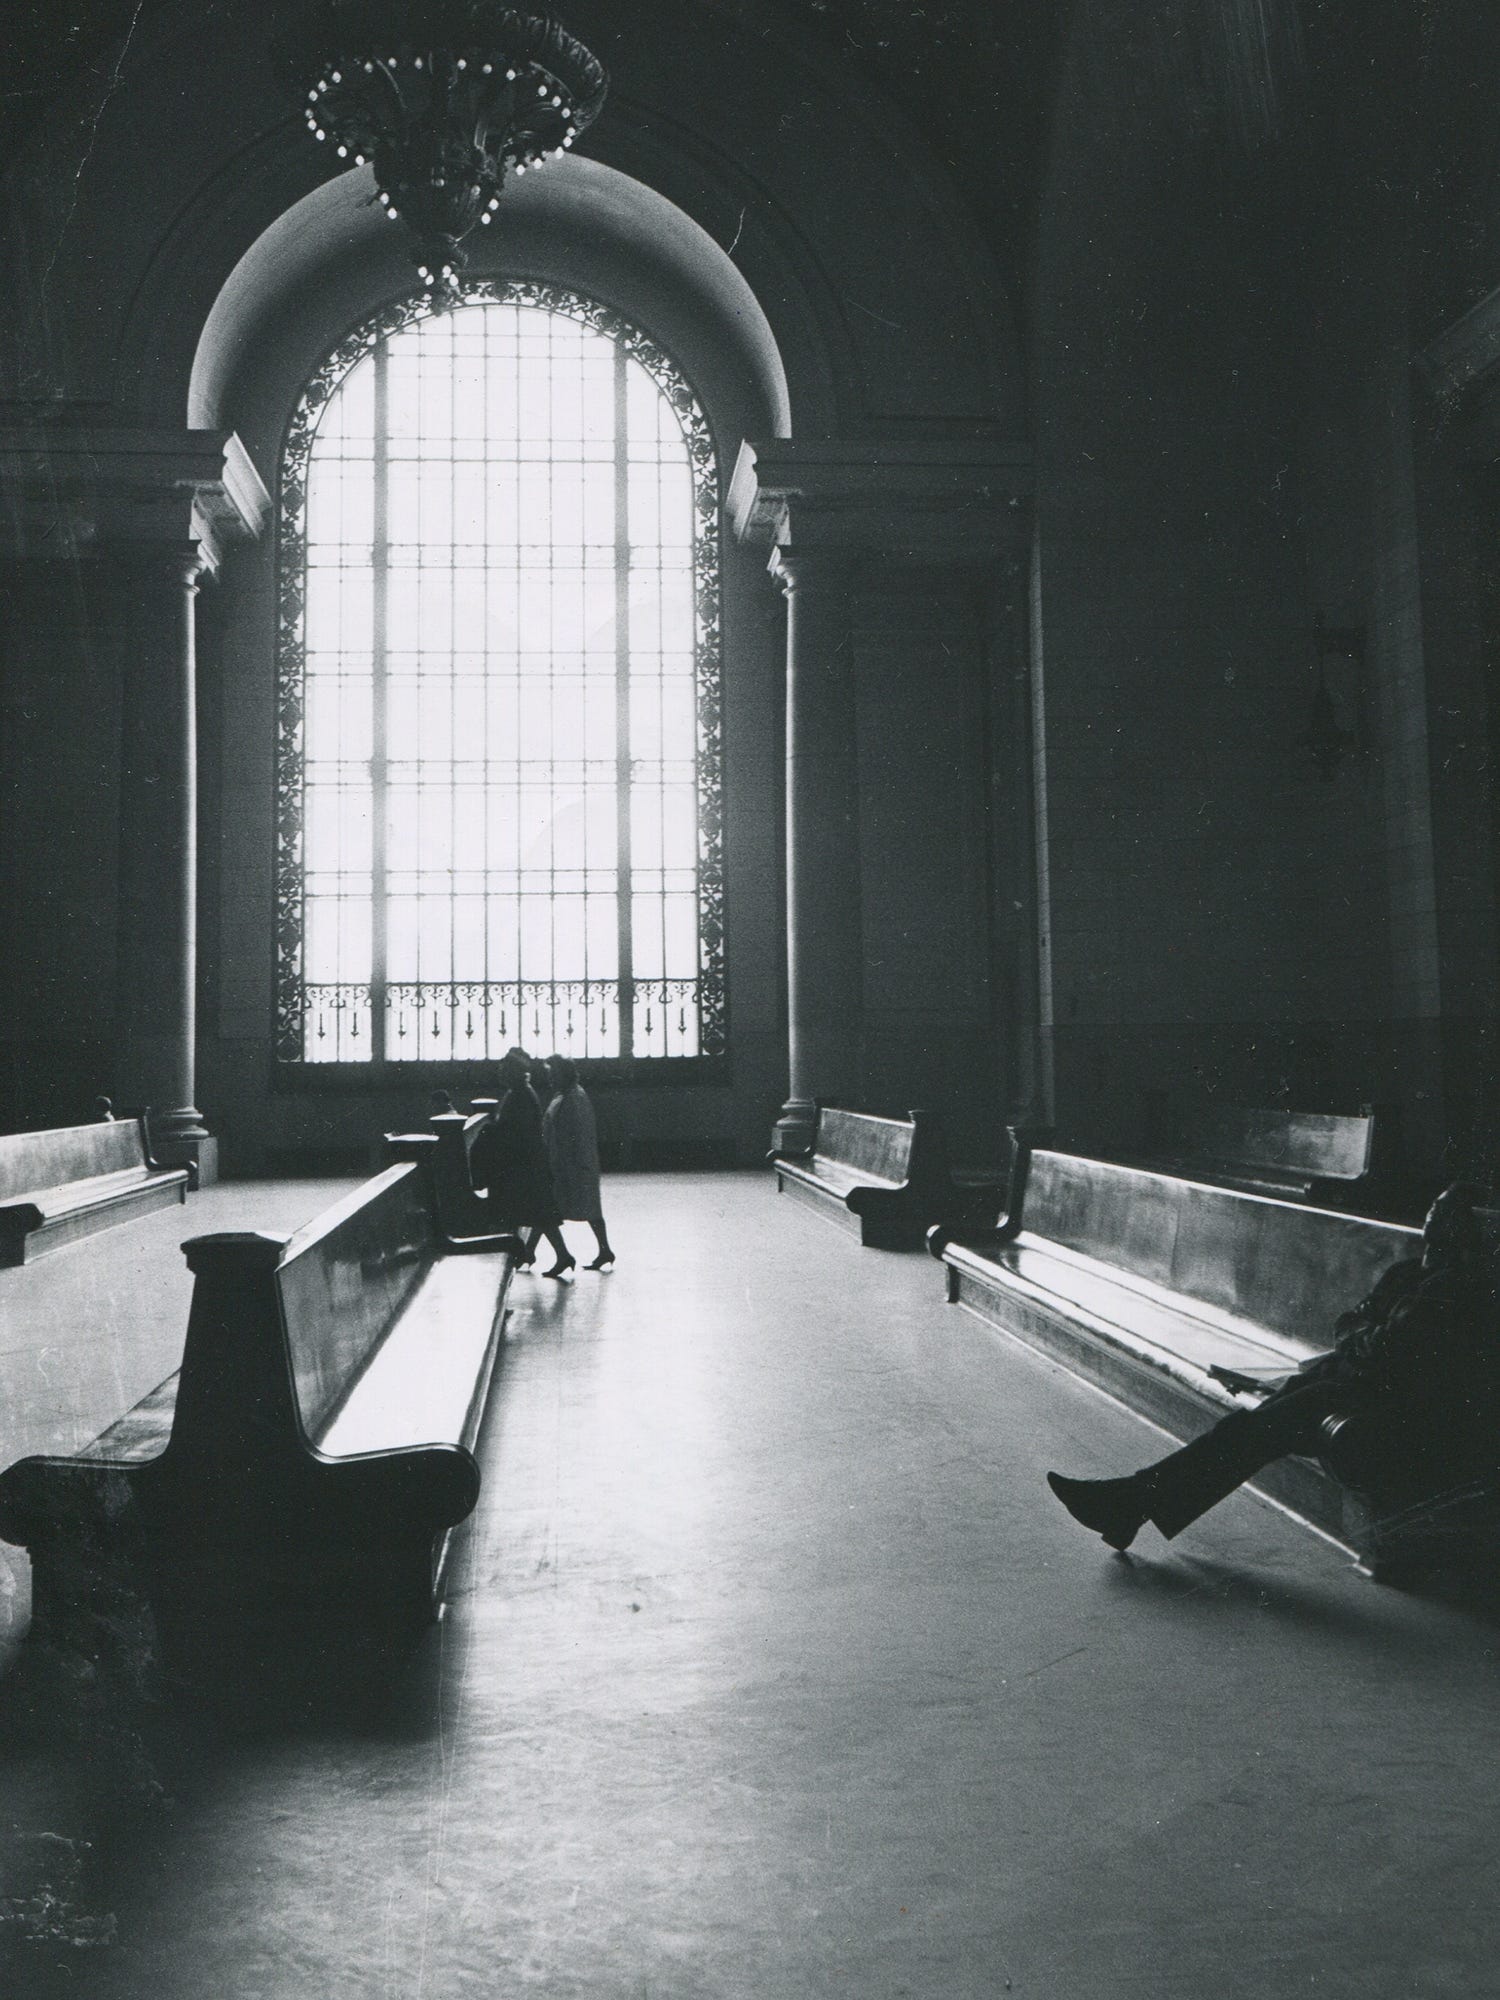 The waiting room at the station is seen May 3, 1966.